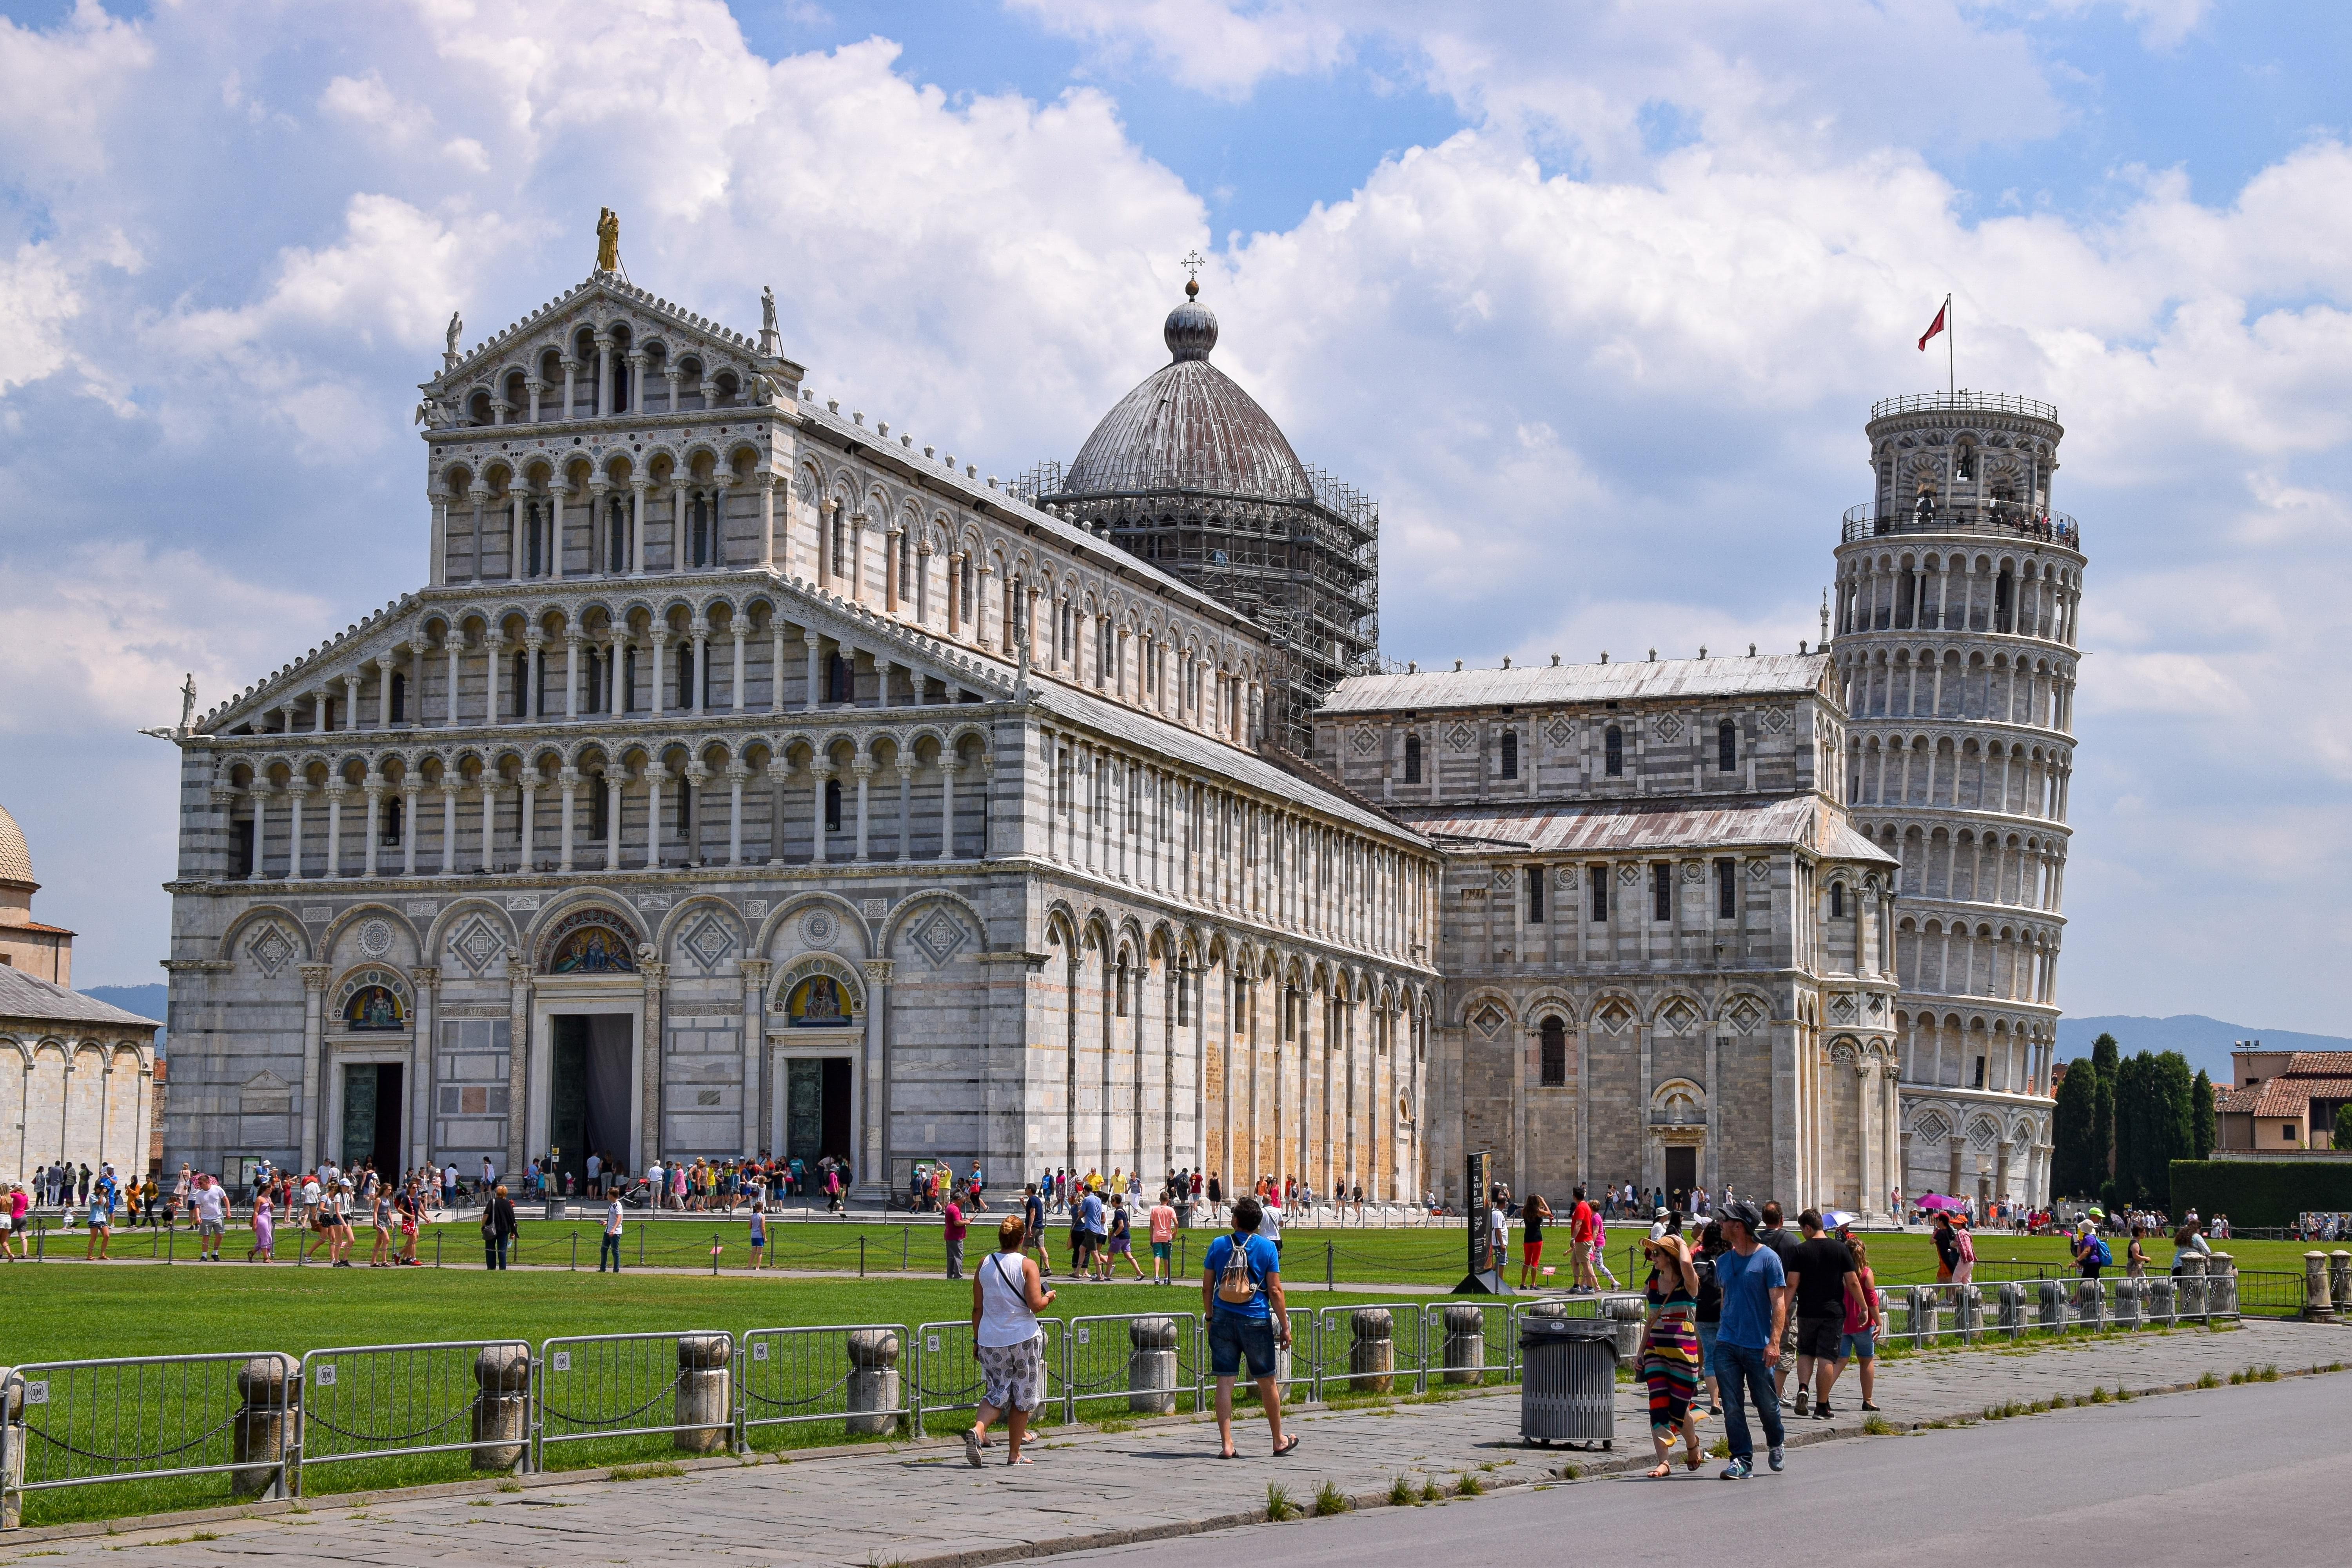 Architecture of Leaning Tower of Pisa